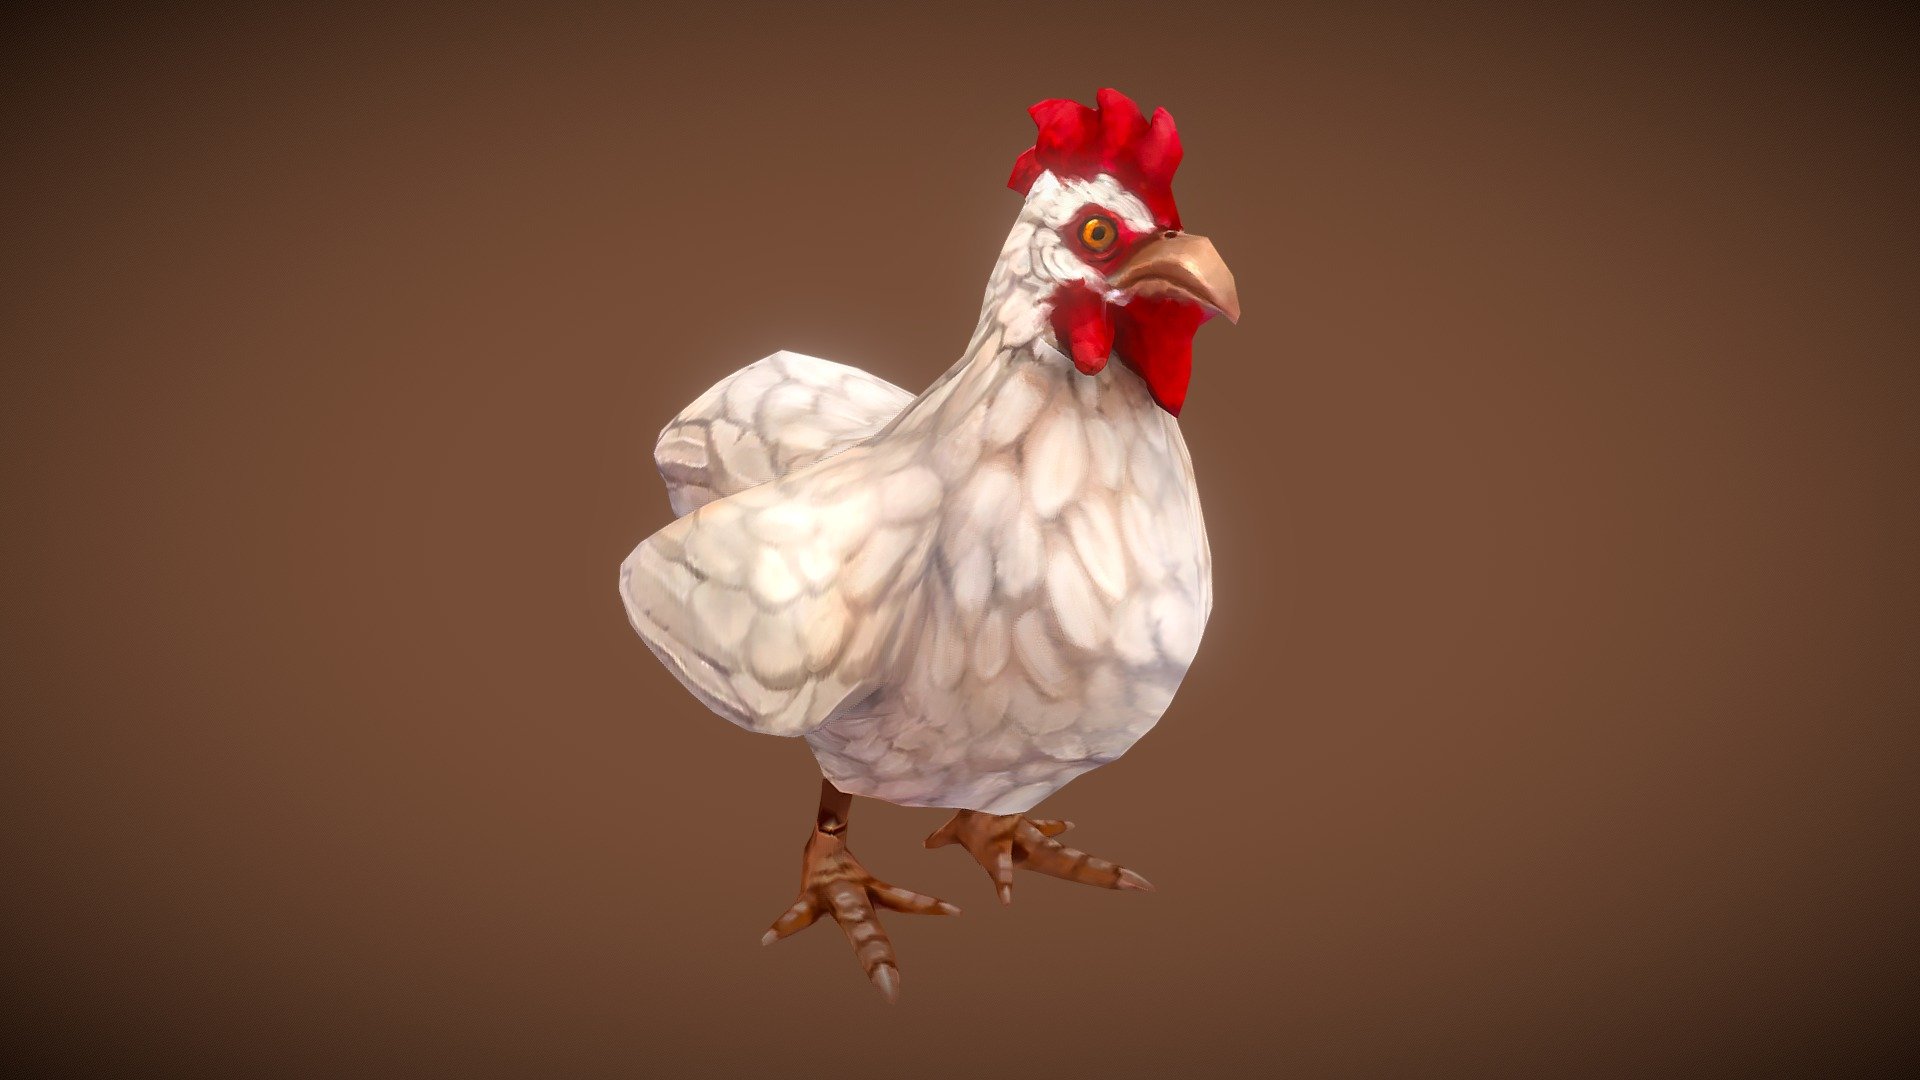 Stylized character for a project.

Software used: Zbrush, Autodesk Maya, Autodesk 3ds Max, Substance Painter - Stylized Fantasy Chicken - 3D model by N-hance Studio (@Malice6731) 3d model